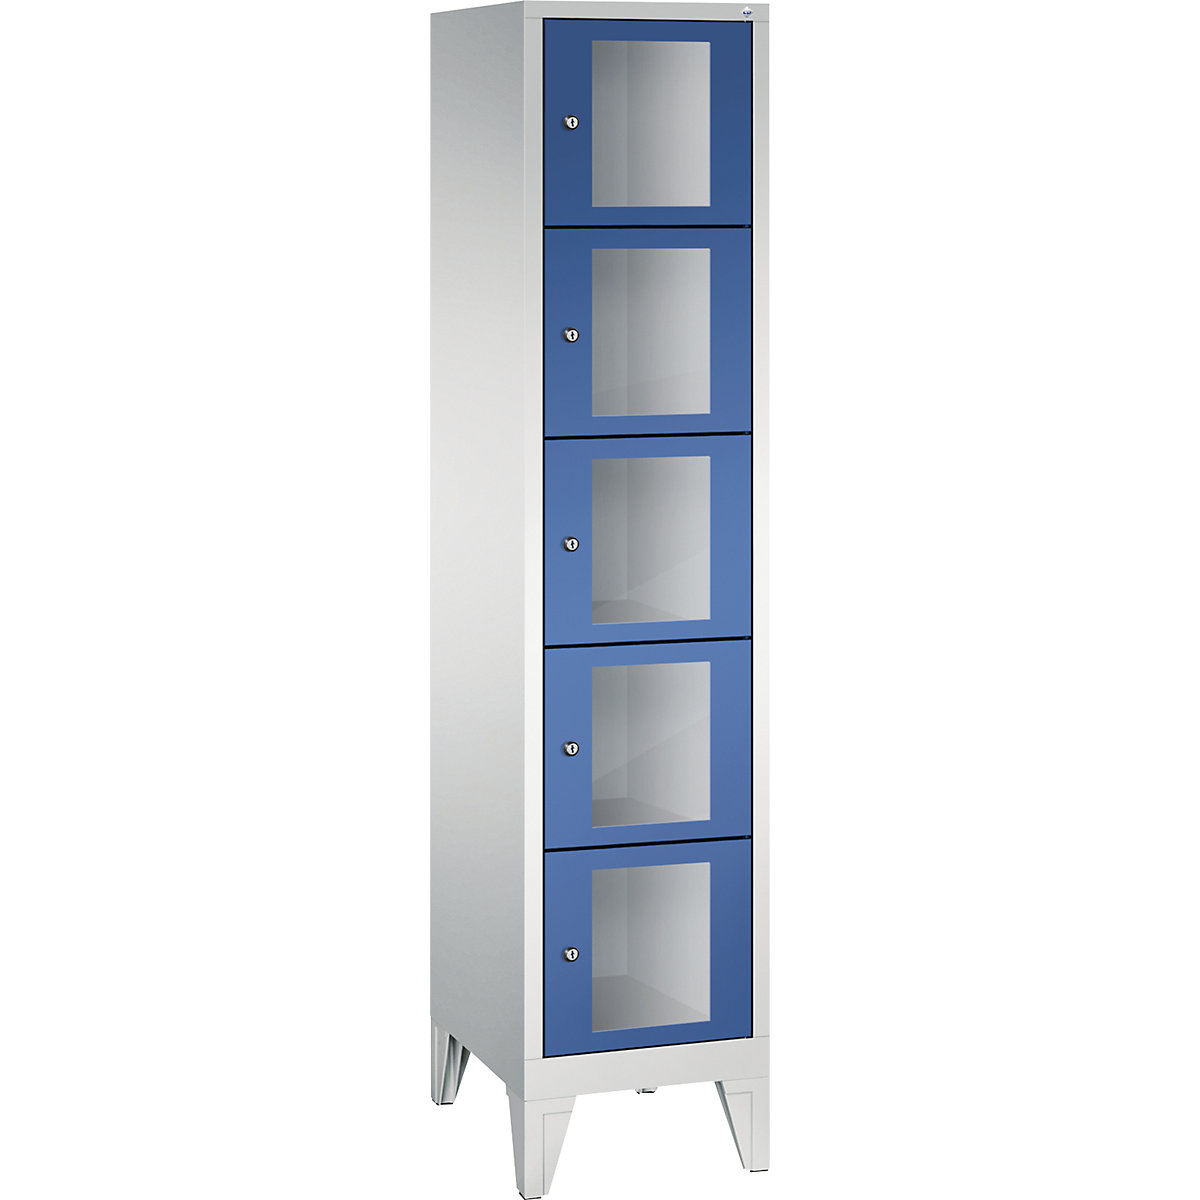 C+P – CLASSIC locker unit, compartment height 295 mm, with feet, 5 compartments, width 420 mm, gentian blue door